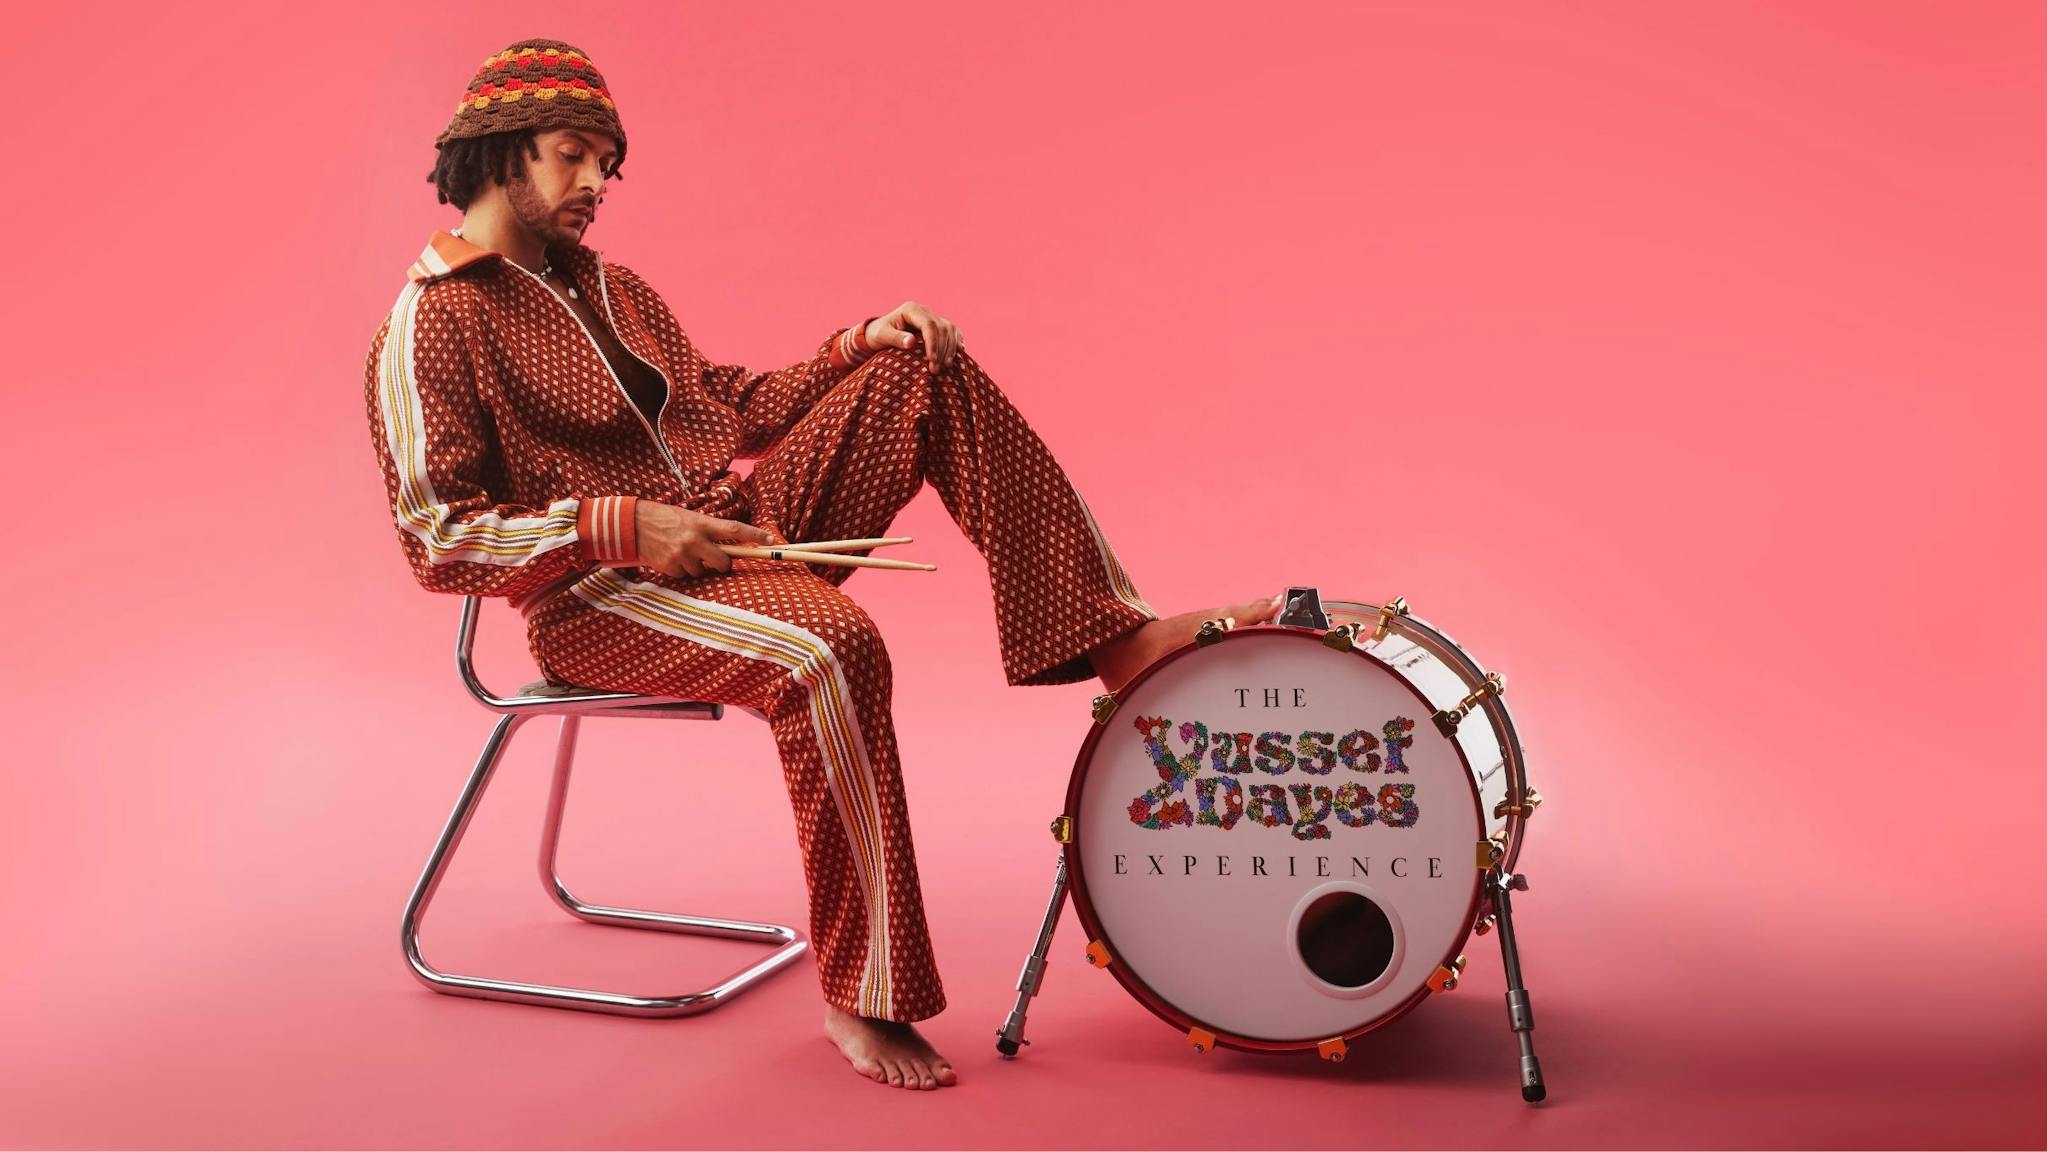 Yussef Dayes - person in beige tracksuit seated on a chair with their foot resting on a kick drum